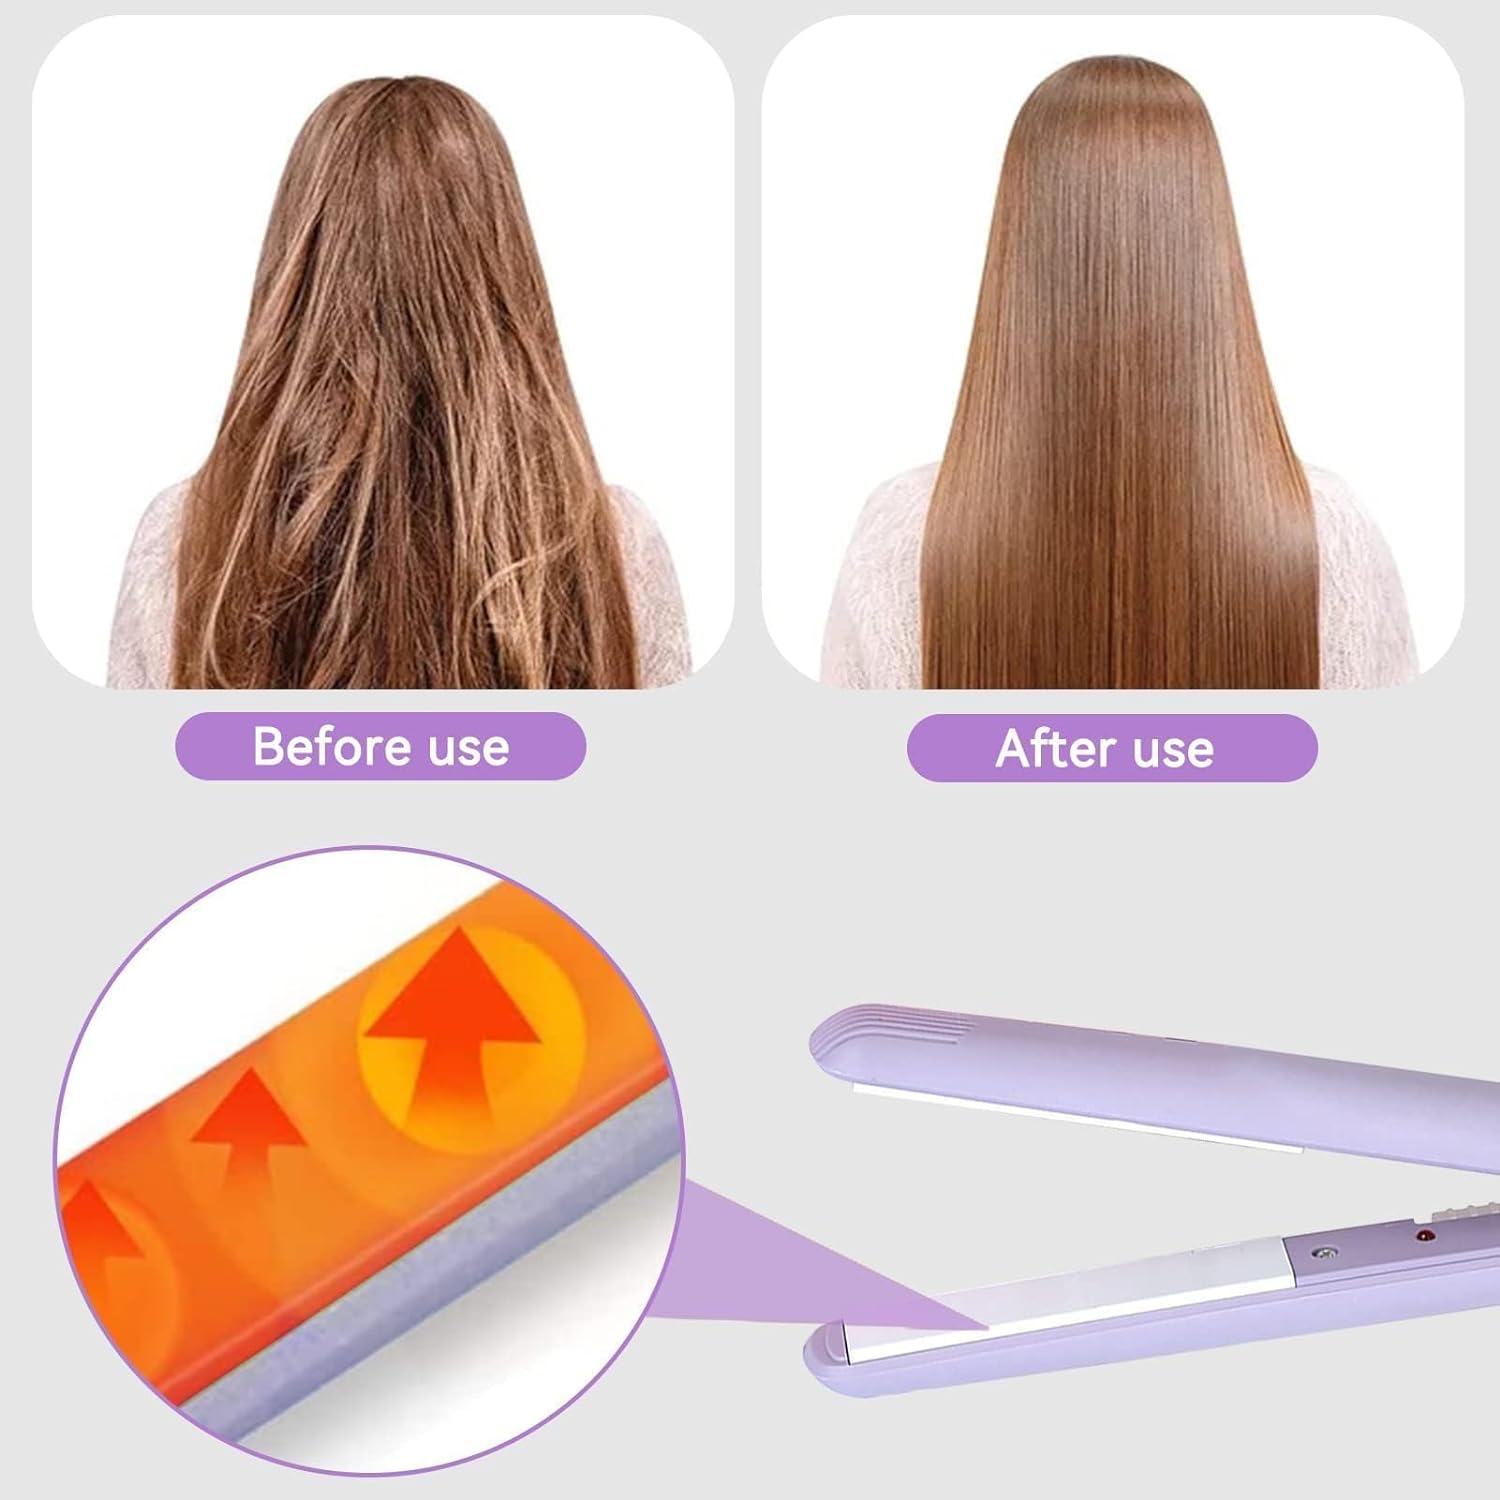 CurlPro™ | Hair Styling Tools